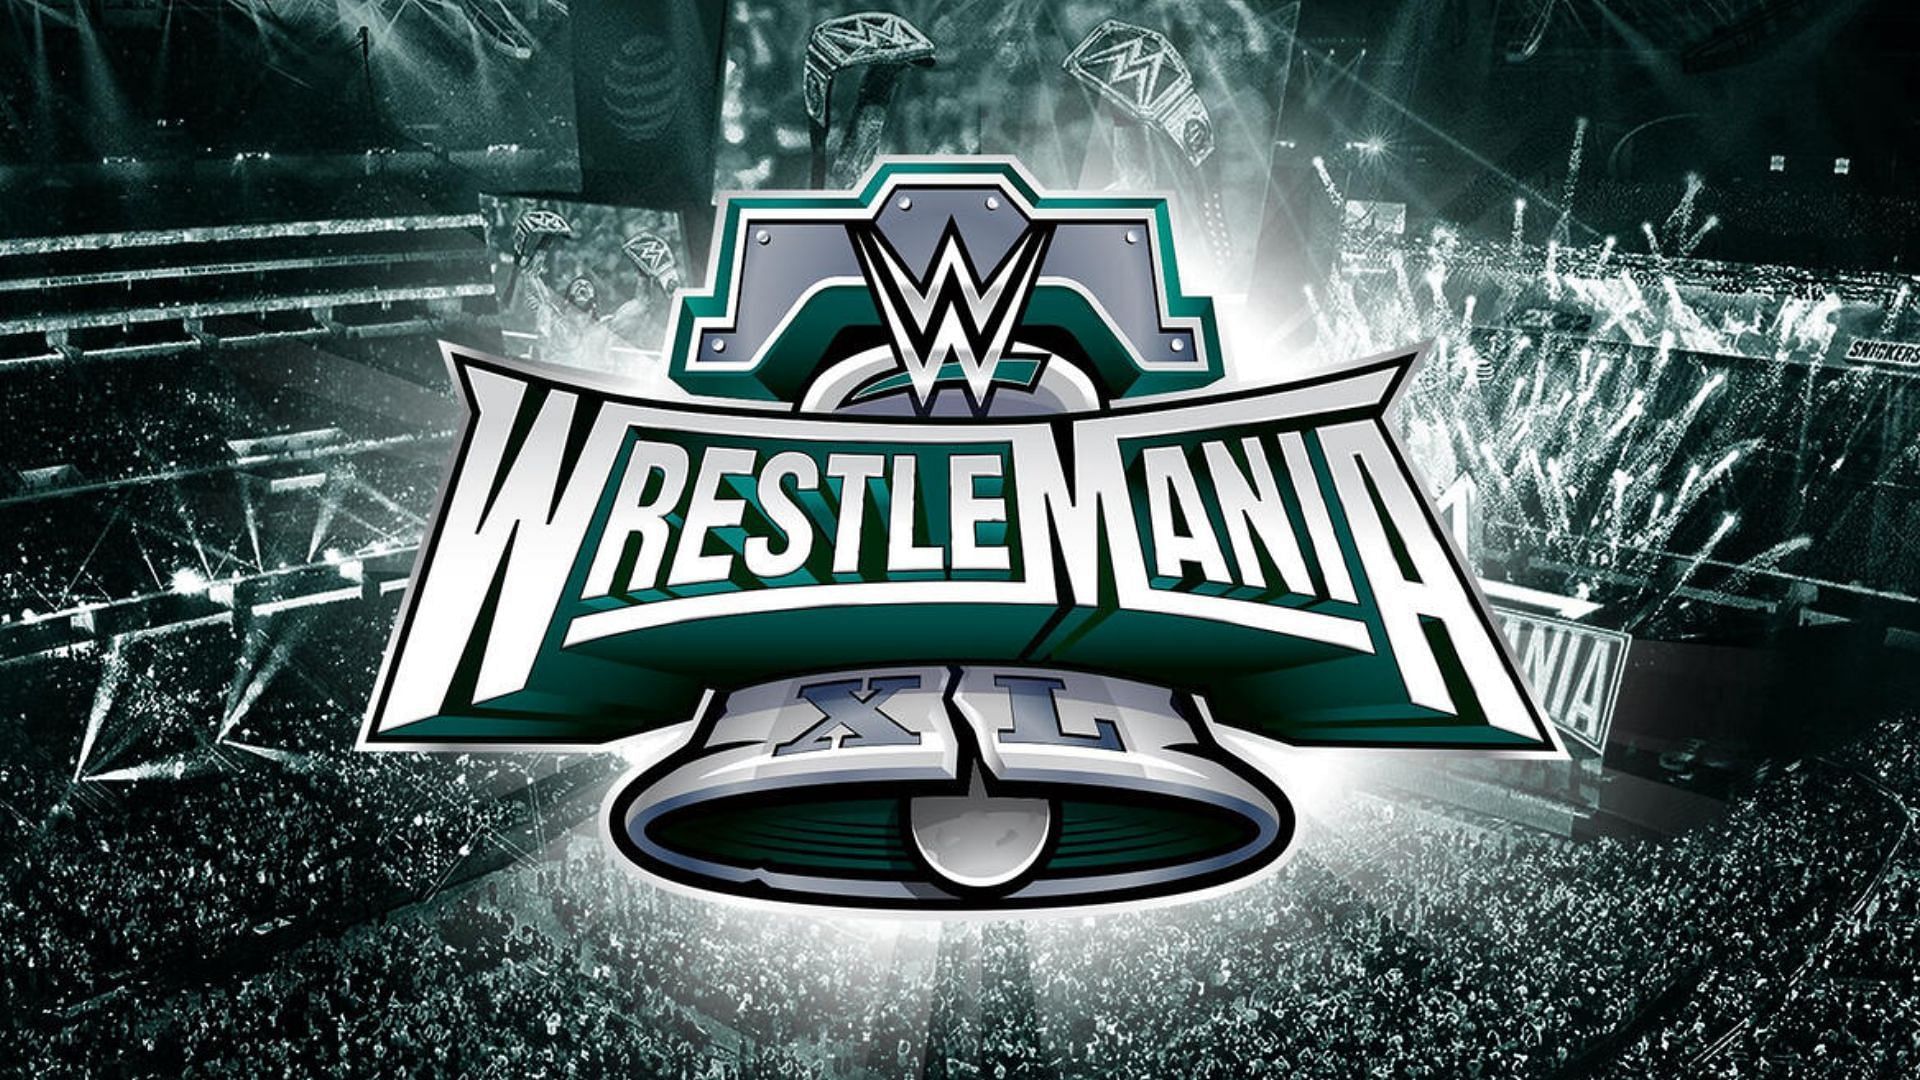 WrestleMania 40 will take place in Philly!